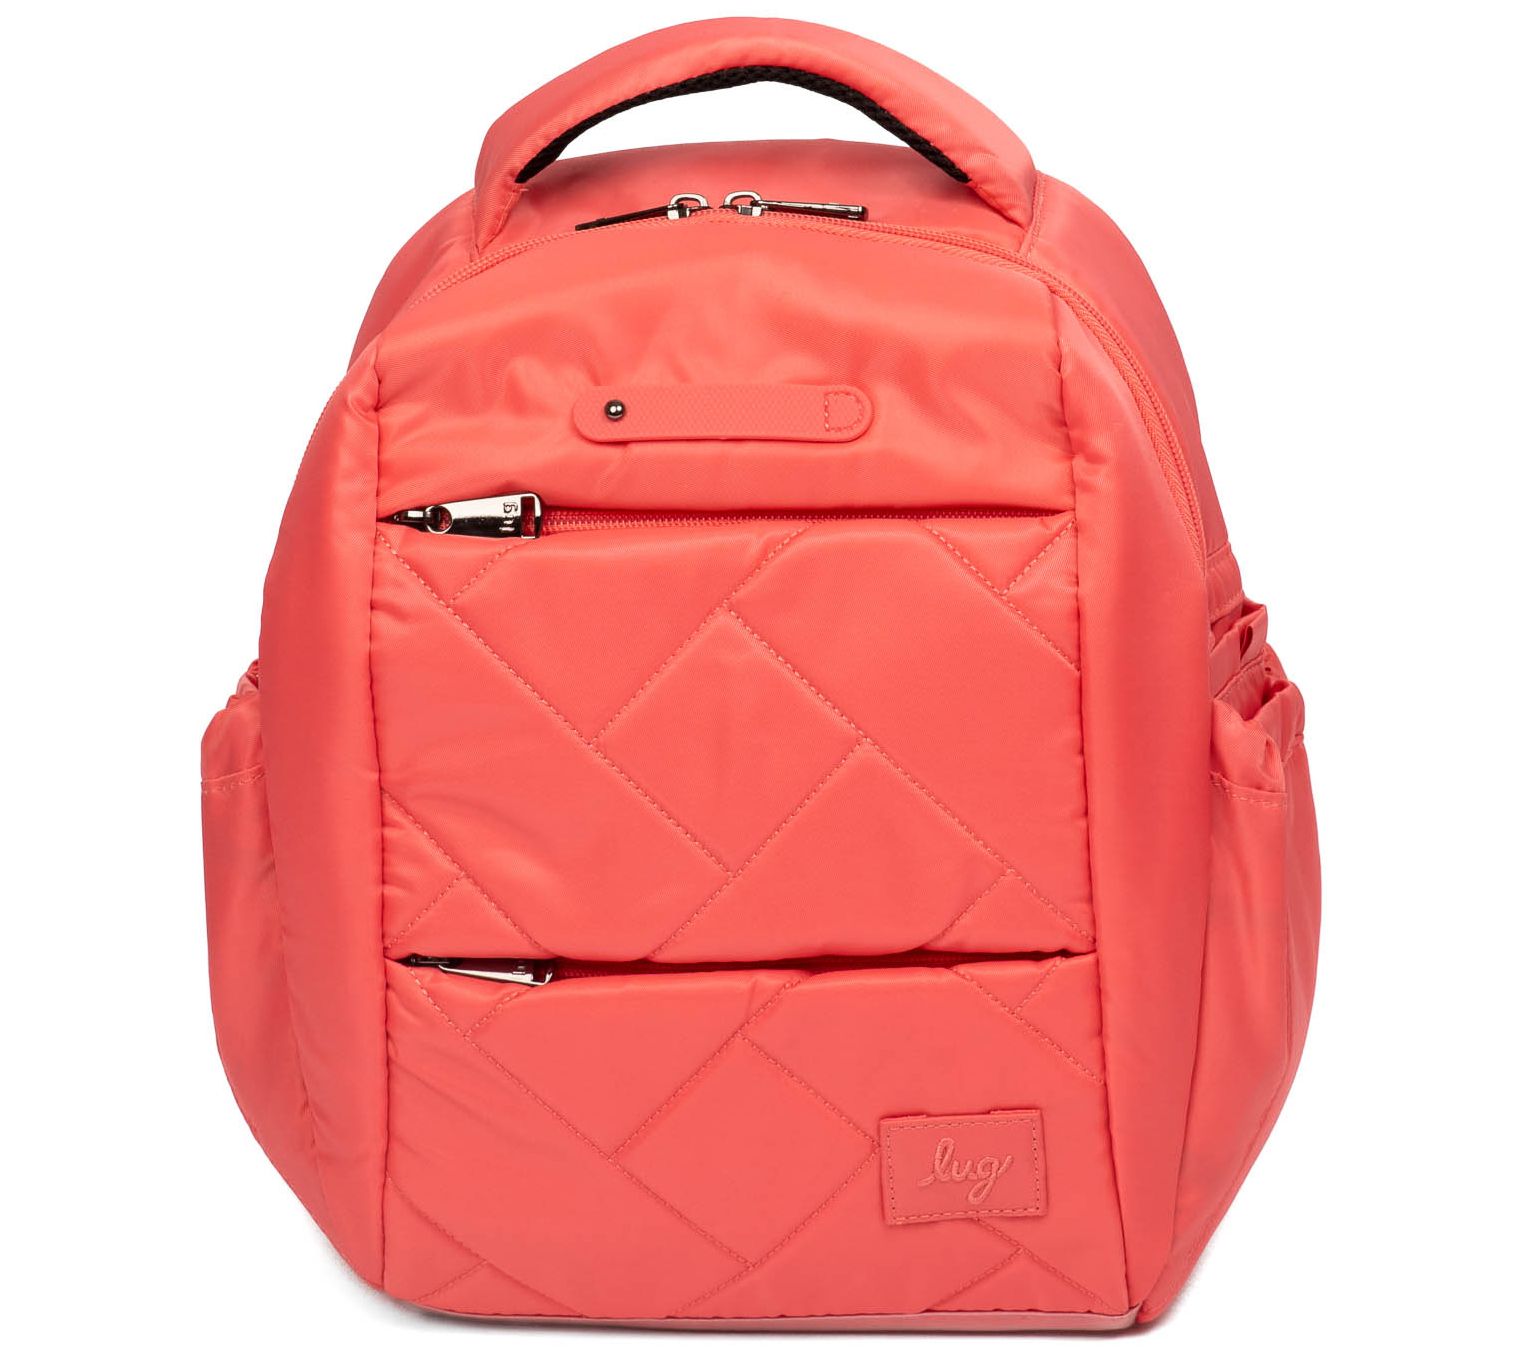 Lug Classic Quilted Backpack - Hopper Shorty ,Watermelon